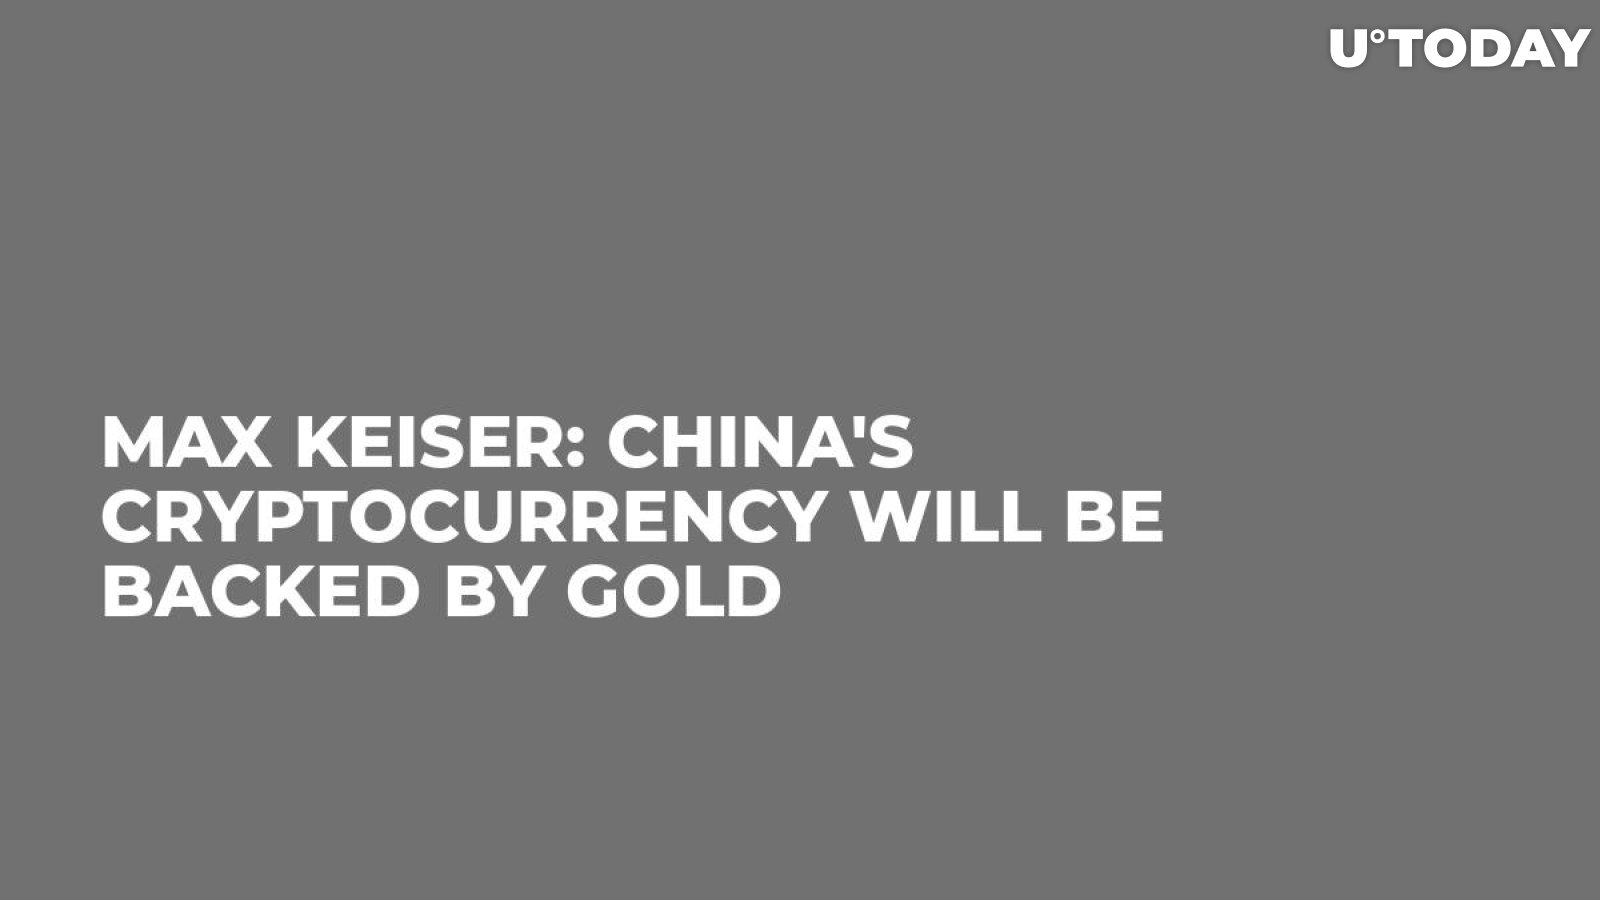 Max Keiser: China's Cryptocurrency Will Be Backed by Gold